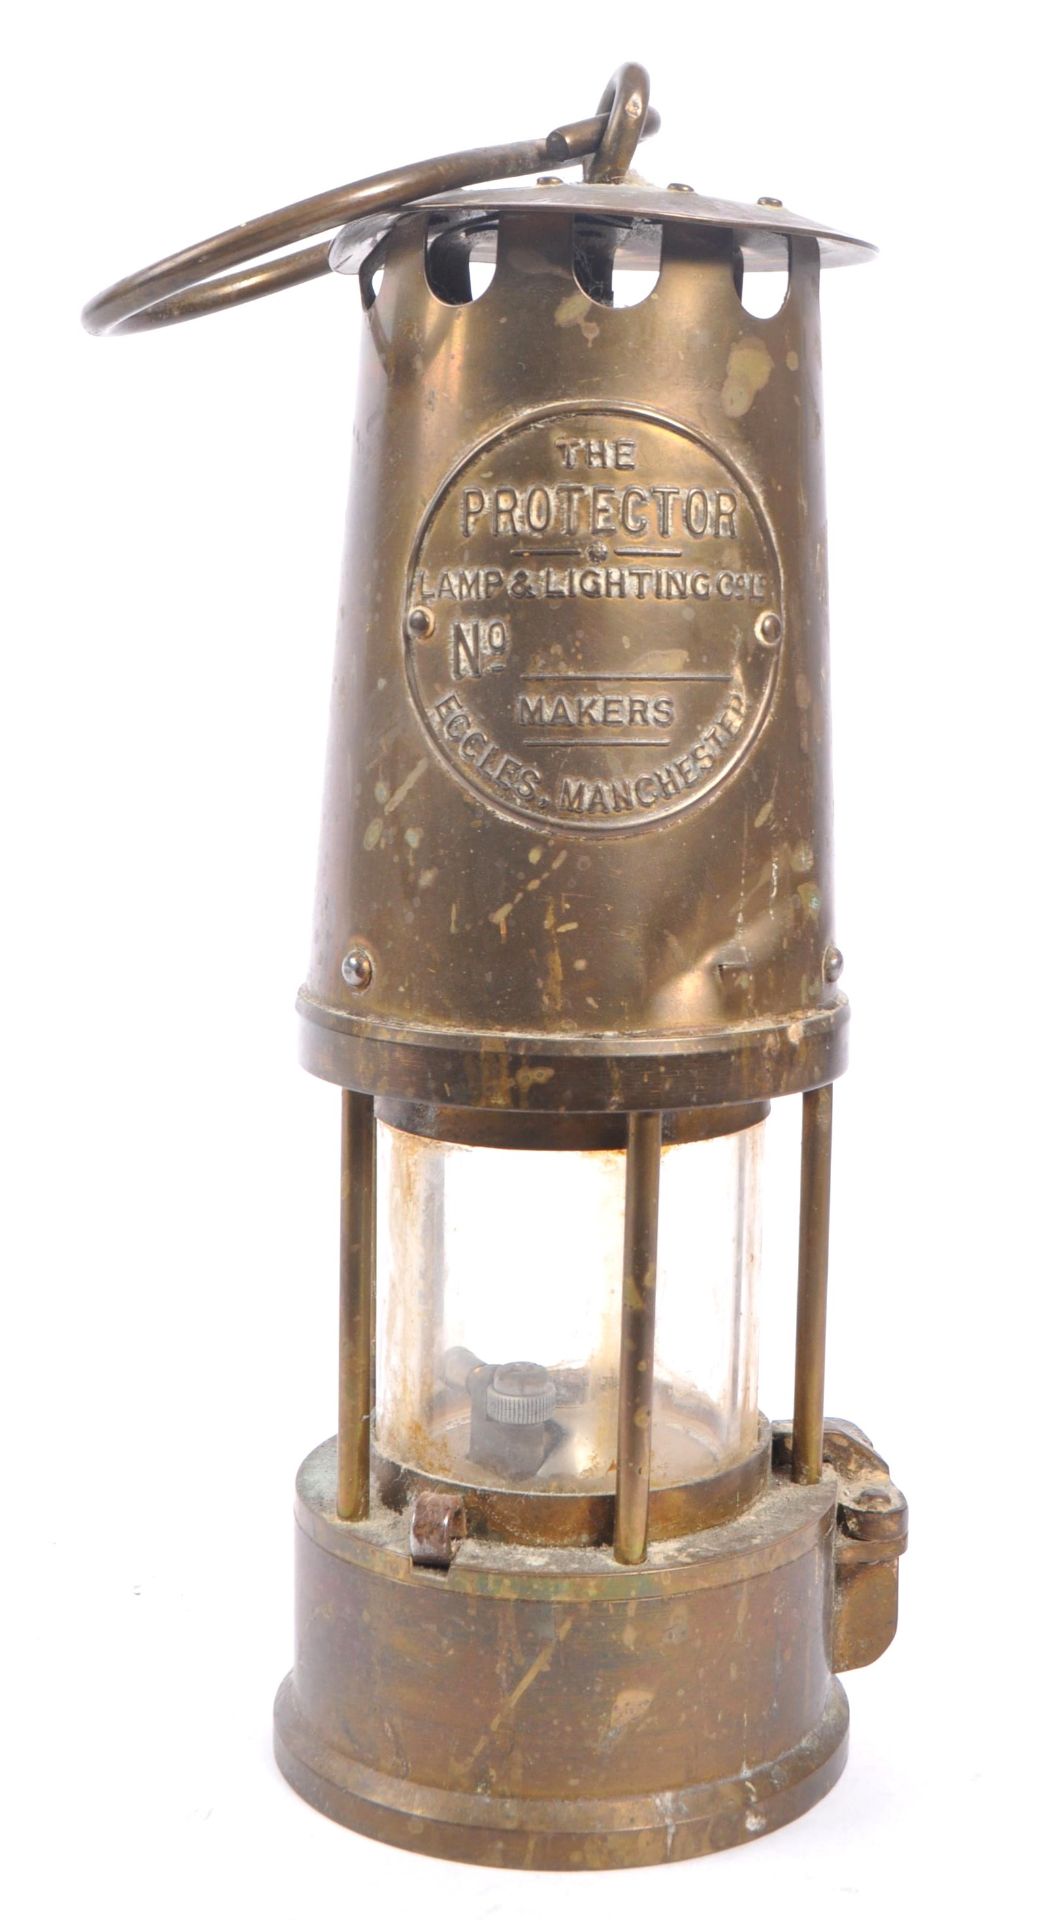 THE PROTECTOR LAMP & LIGHTING - BRASS MINERS LAMP